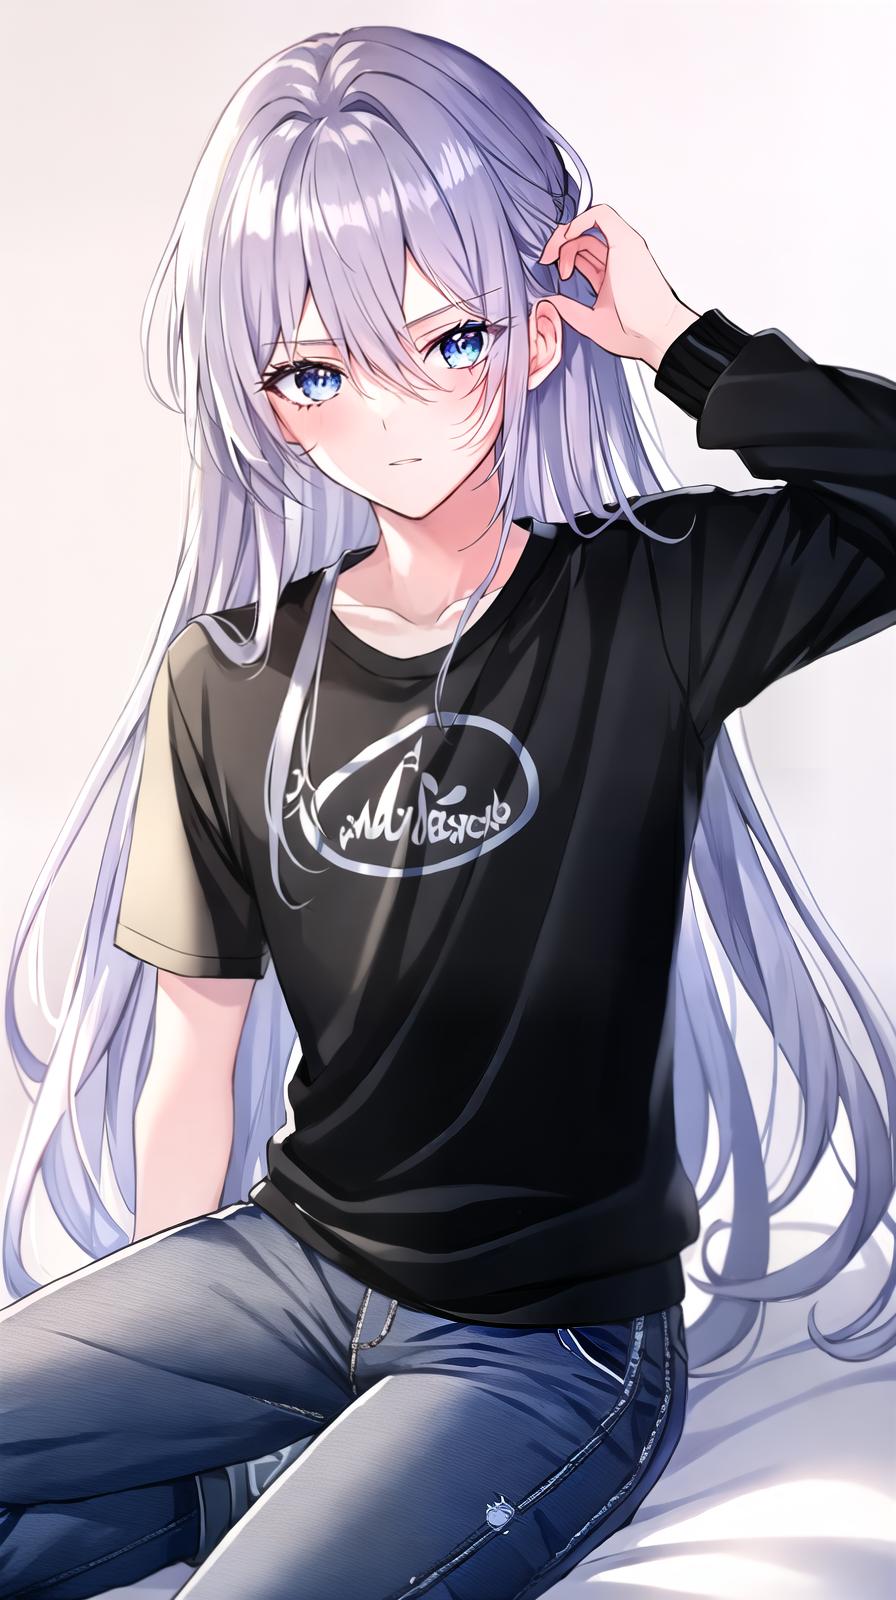  ((((masterpiece)))), best quality, very_high_resolution, ultra-detailed, in-frame, handsome, soft, young, silver hair, blue eyes, long hair in a half-up style, T-shirt, bomber jacket, slim pants, blue top and black bottom, eye patch covering a burn scar on the left eye, prince-like, beautiful eyelashes